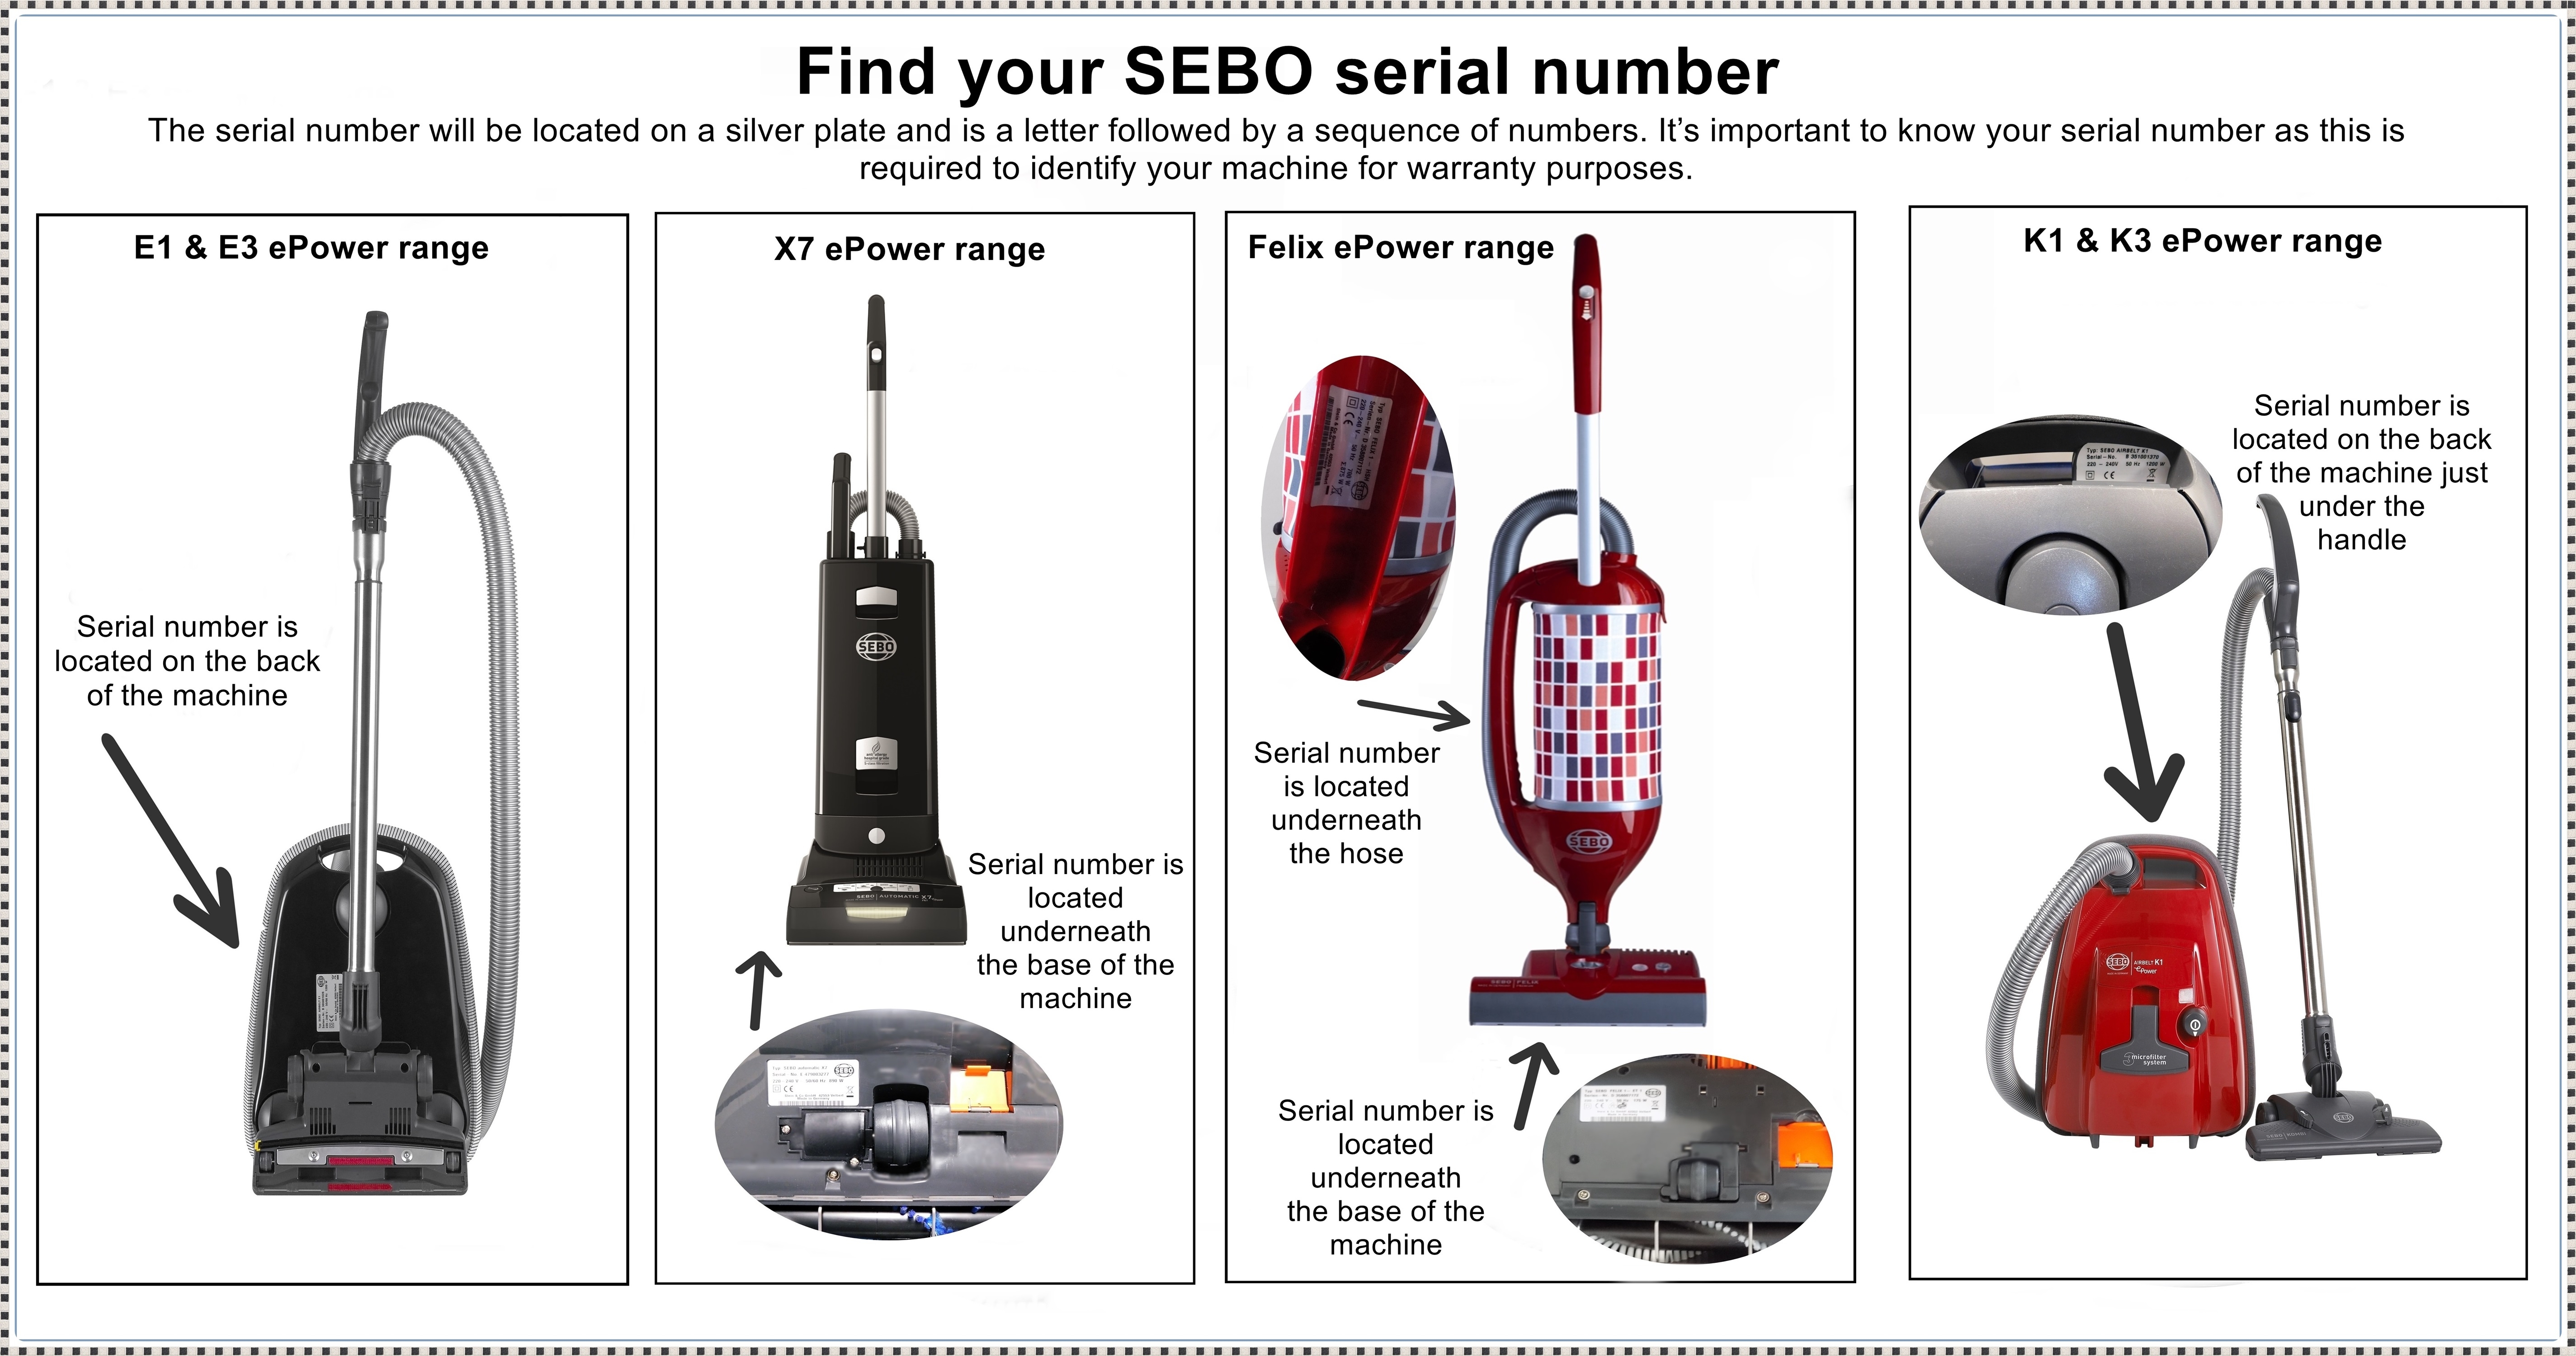 Find your SEBO serial number